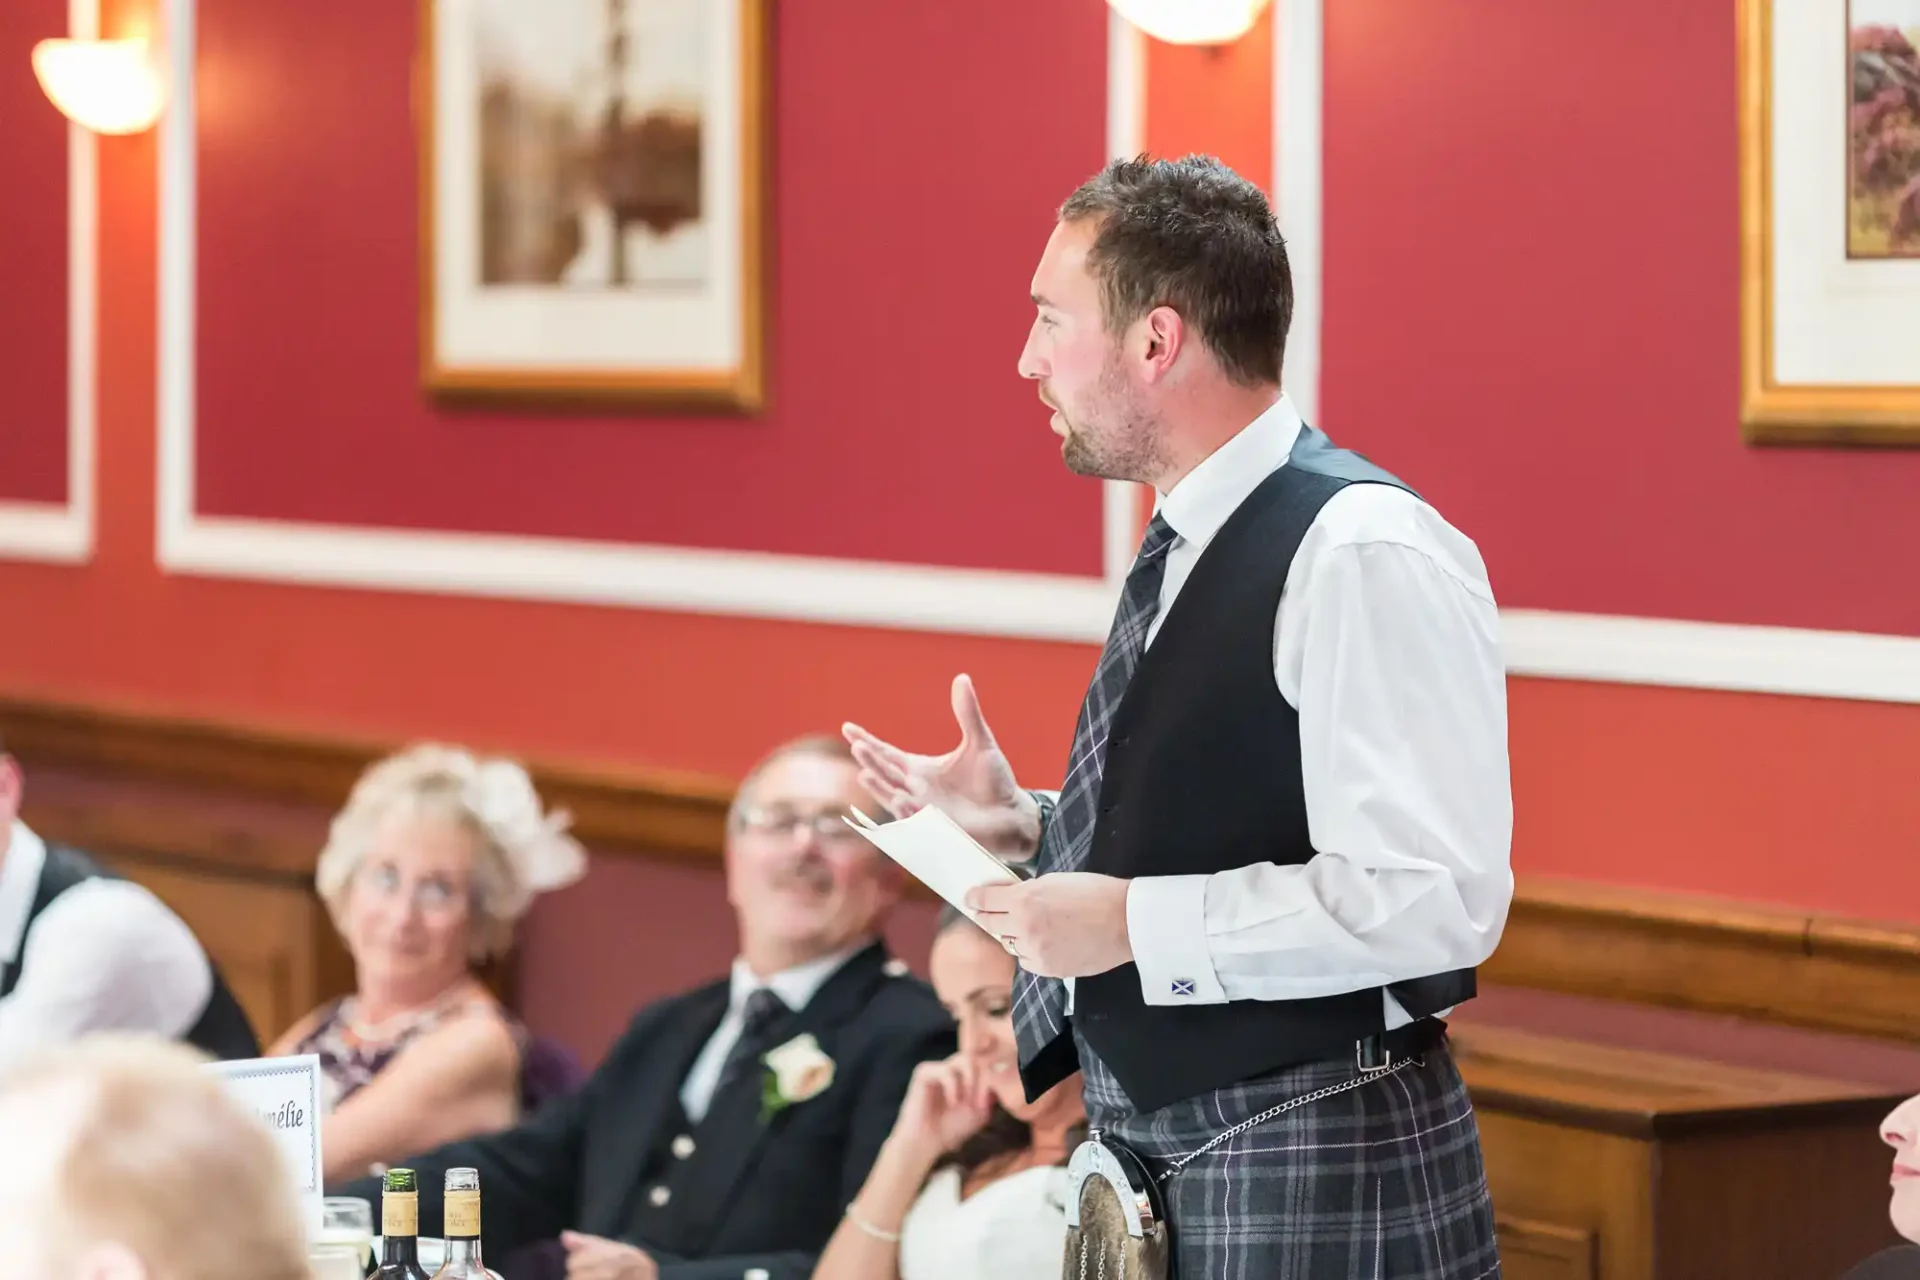 A man in a vest and kilt speaking animatedly at a wedding reception, with seated guests watching in a room with red walls.